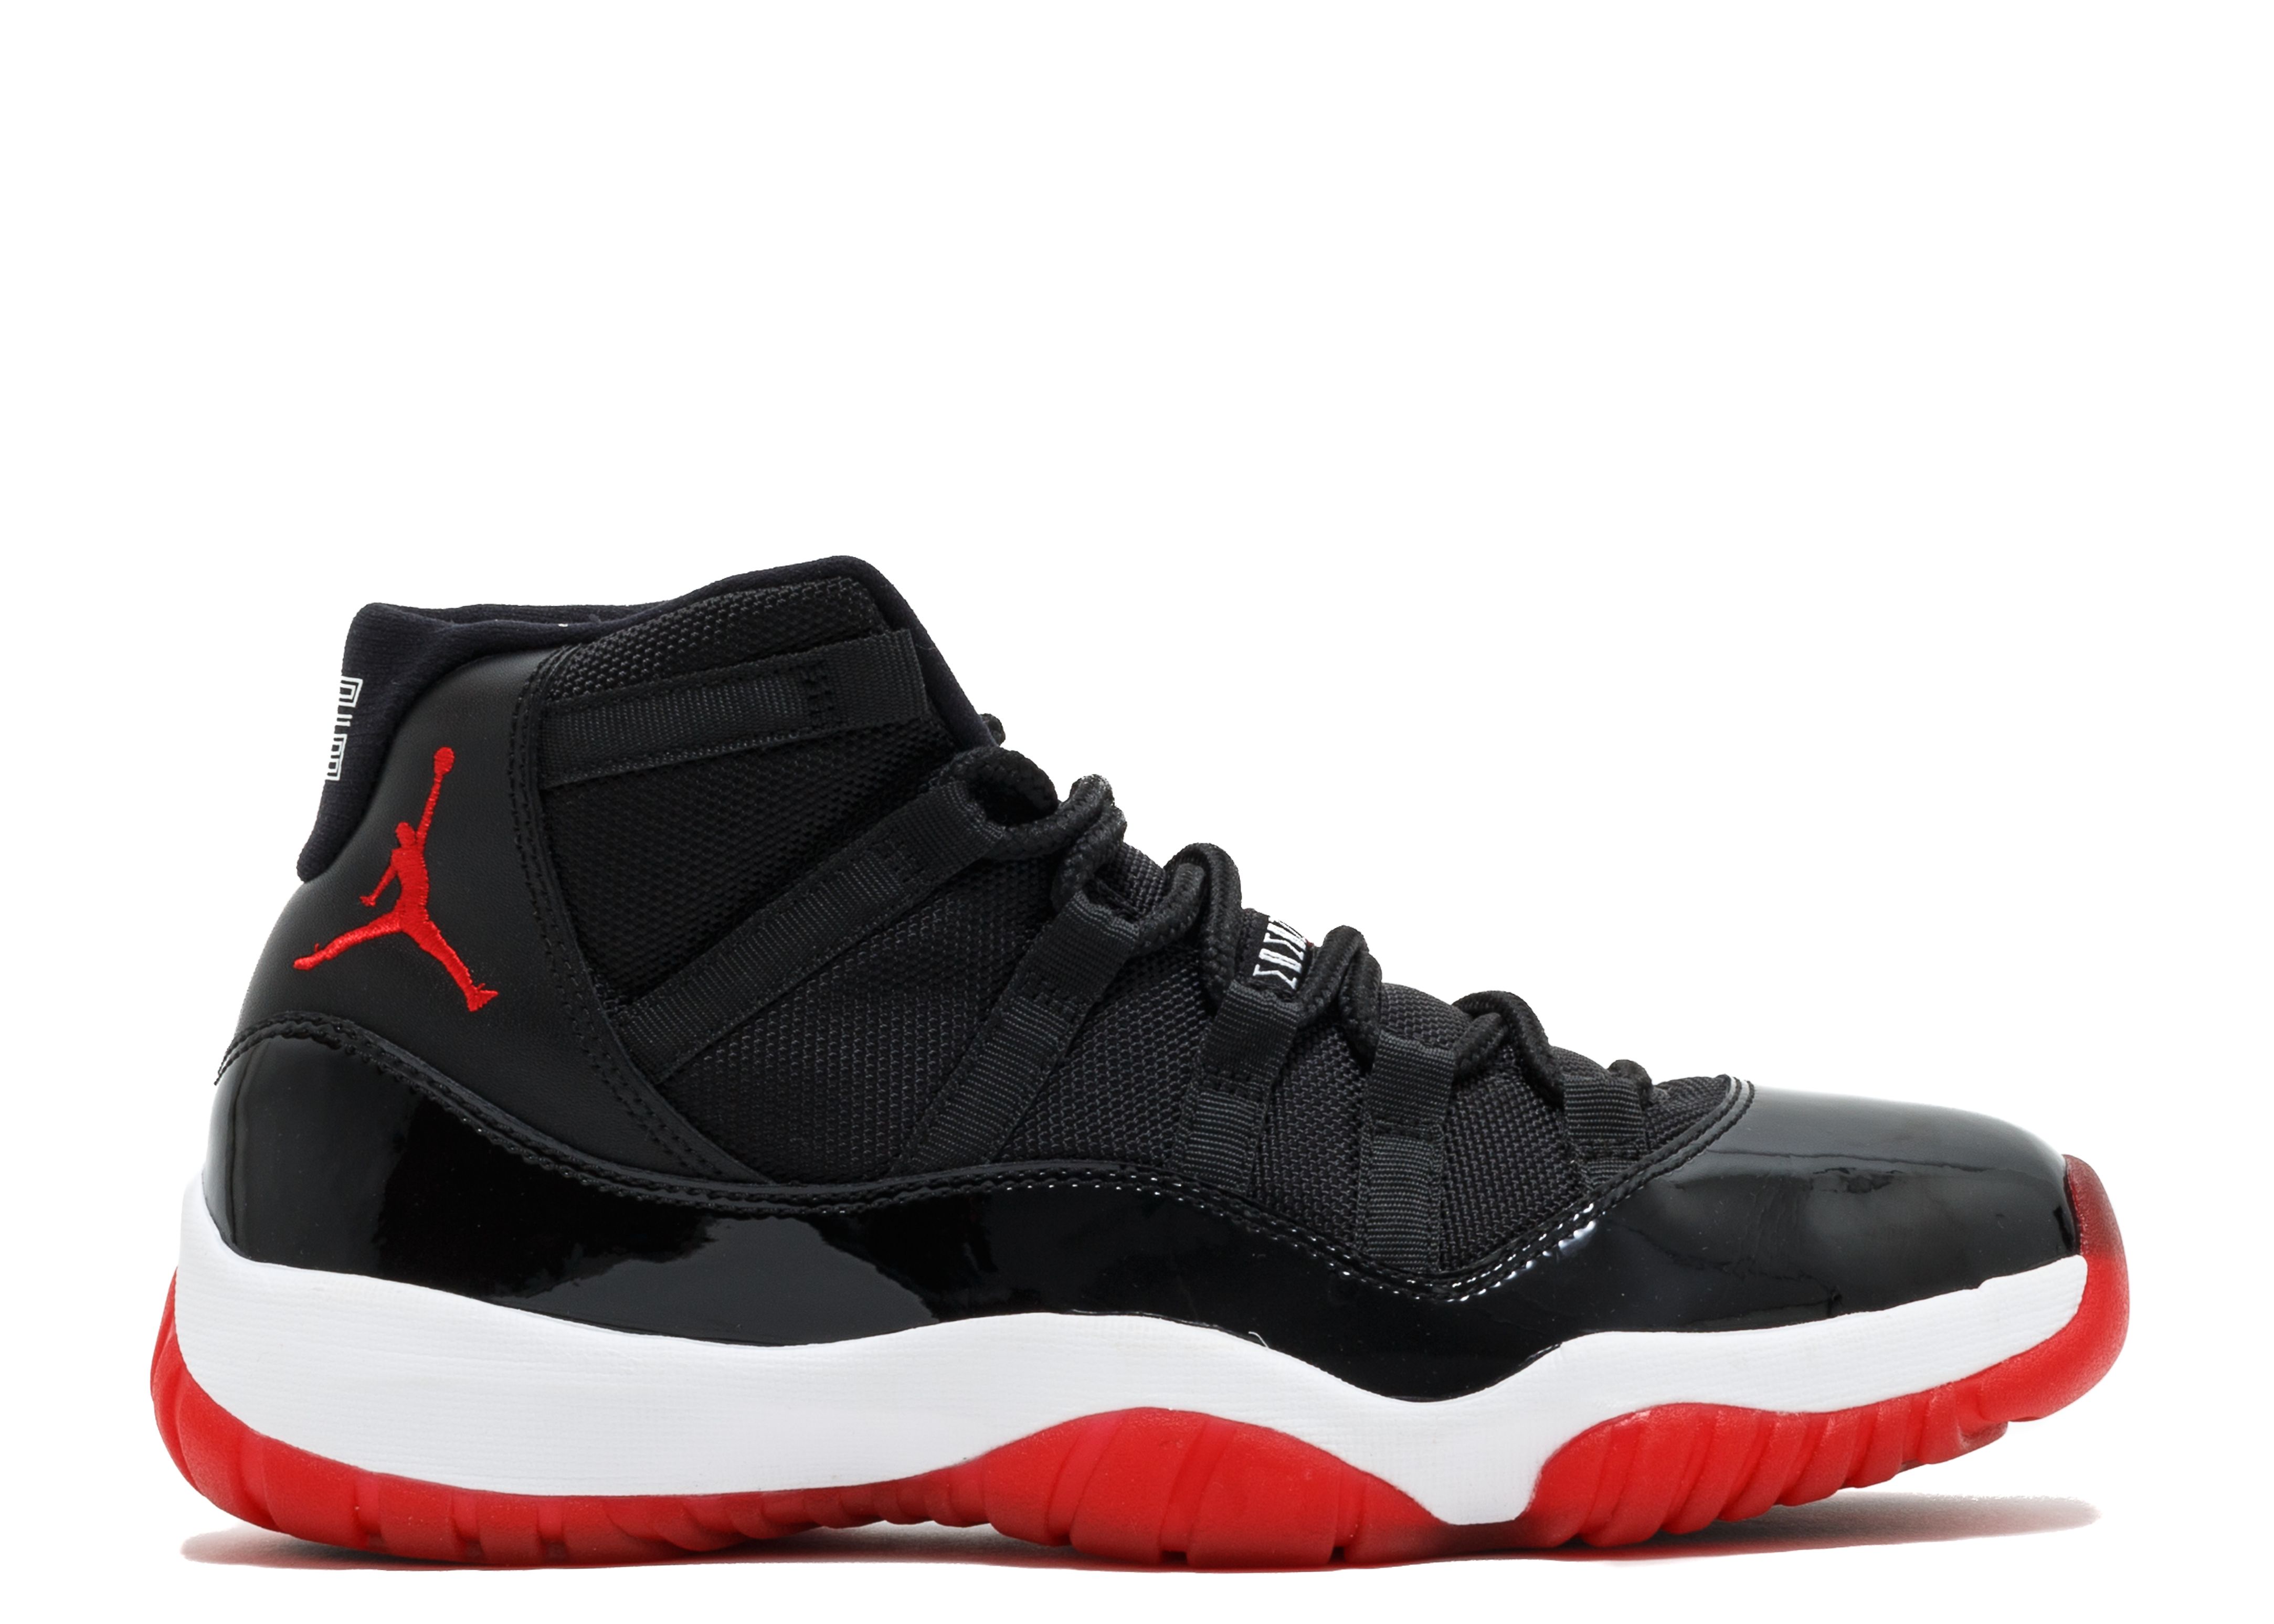 retro 11 black and red Sale,up to 61 